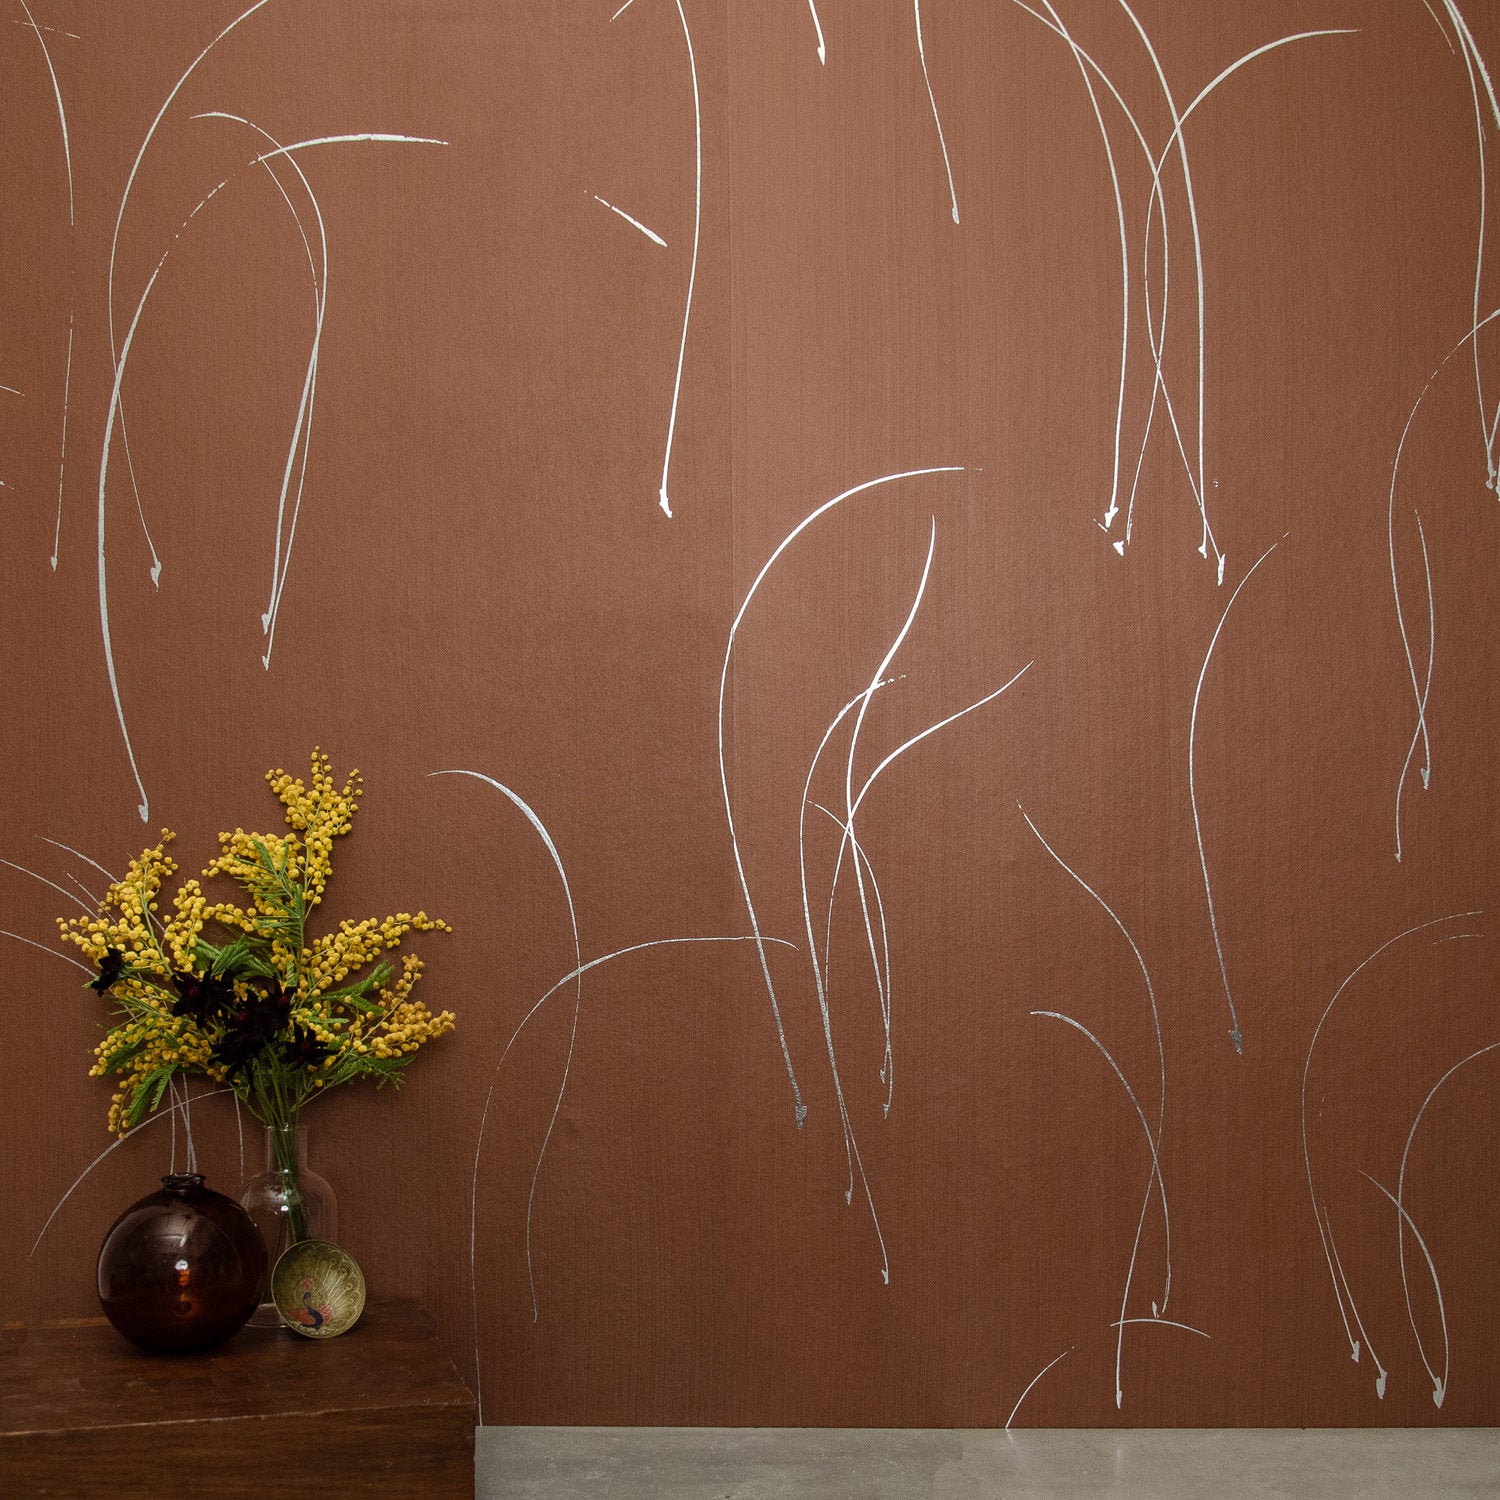 A vase of flowers stands in front of a wall papered in an elongated paint splatter pattern in silver on a brown field.